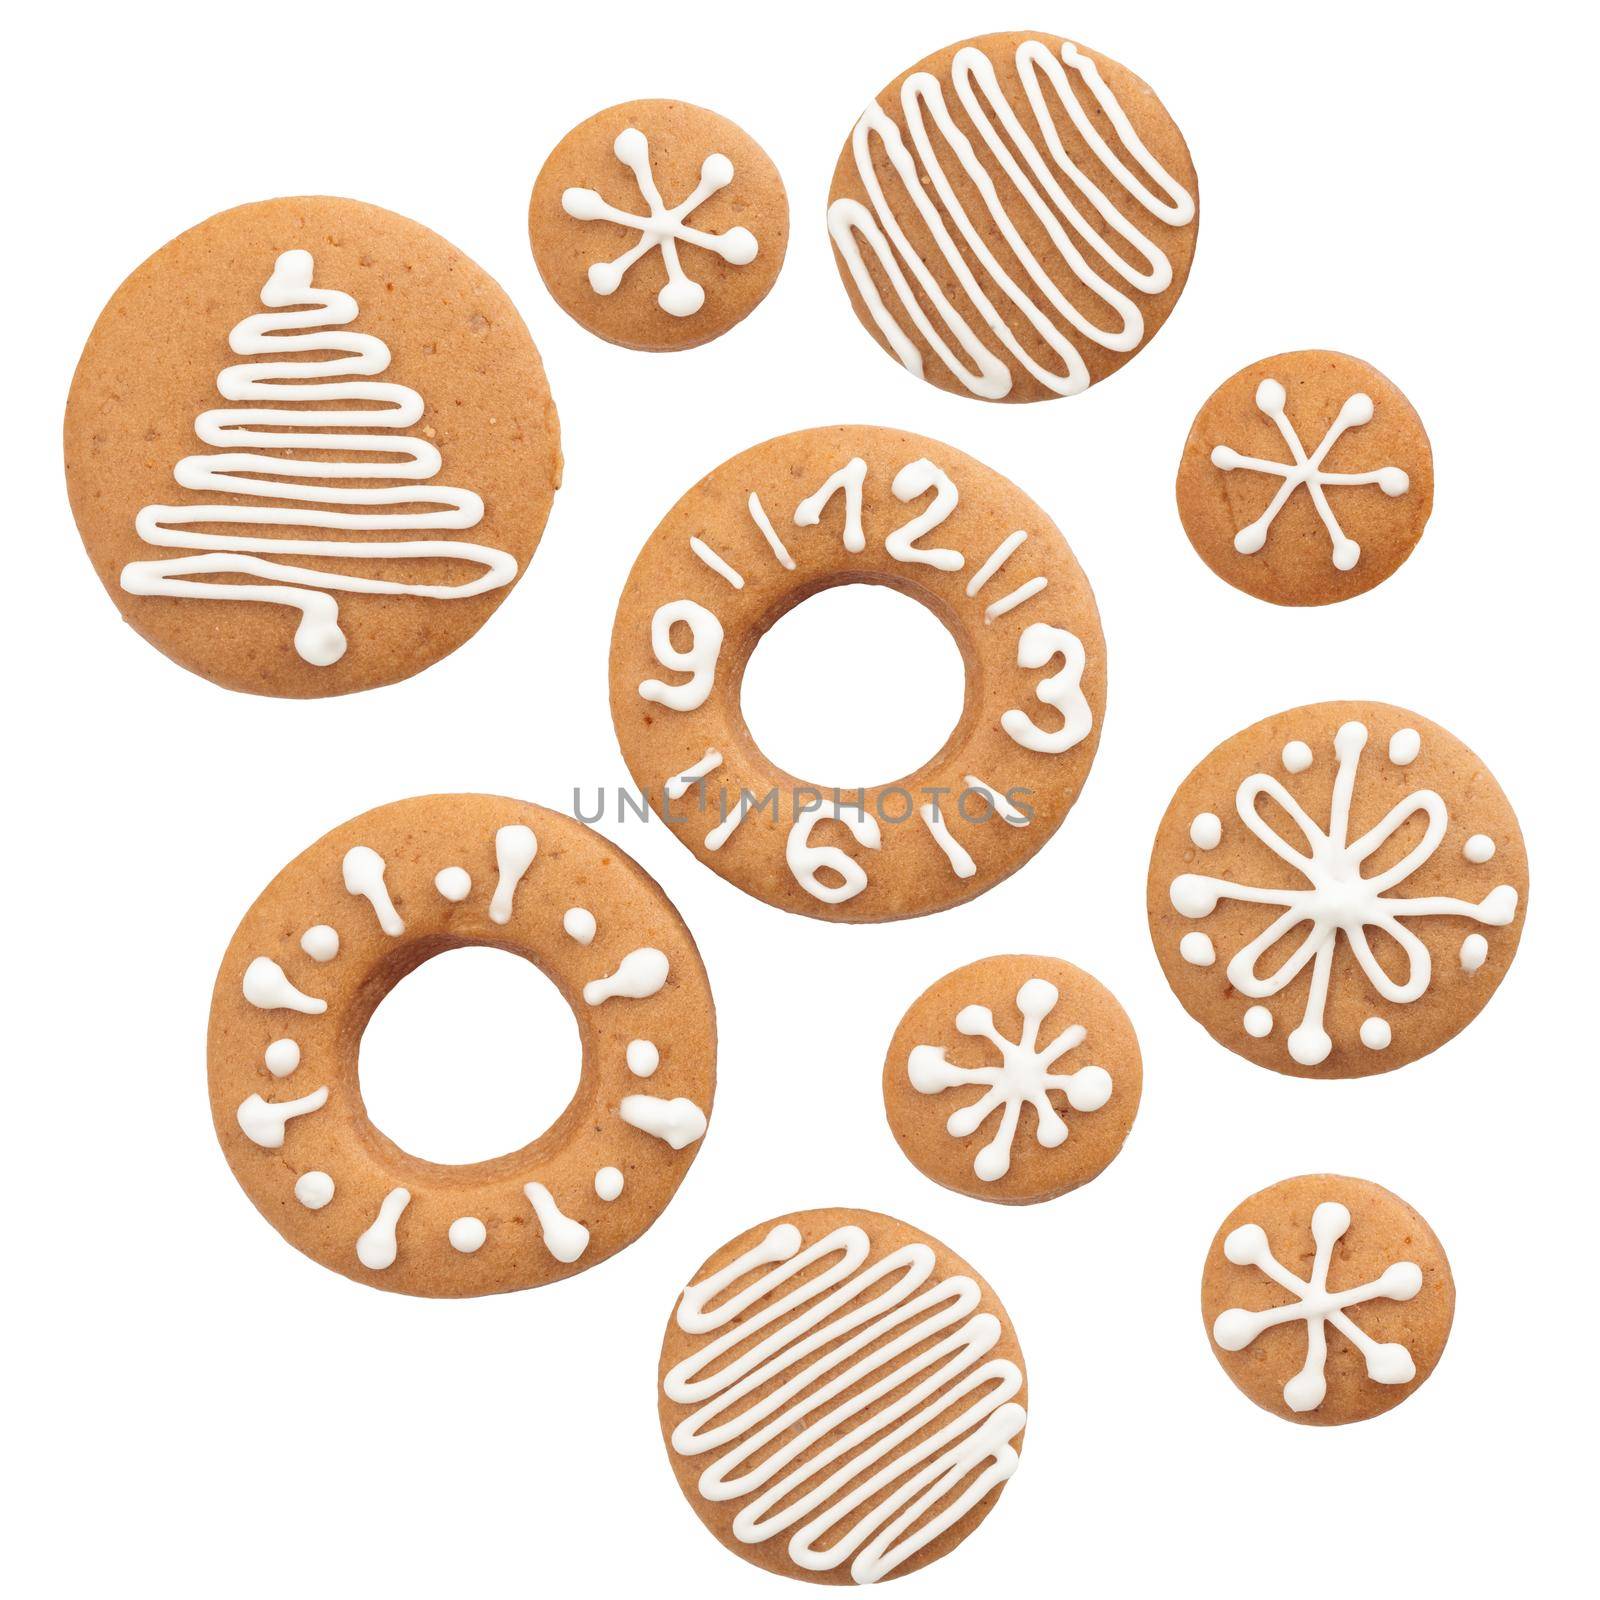 Set of Gingerbread cookies isolated on a white background